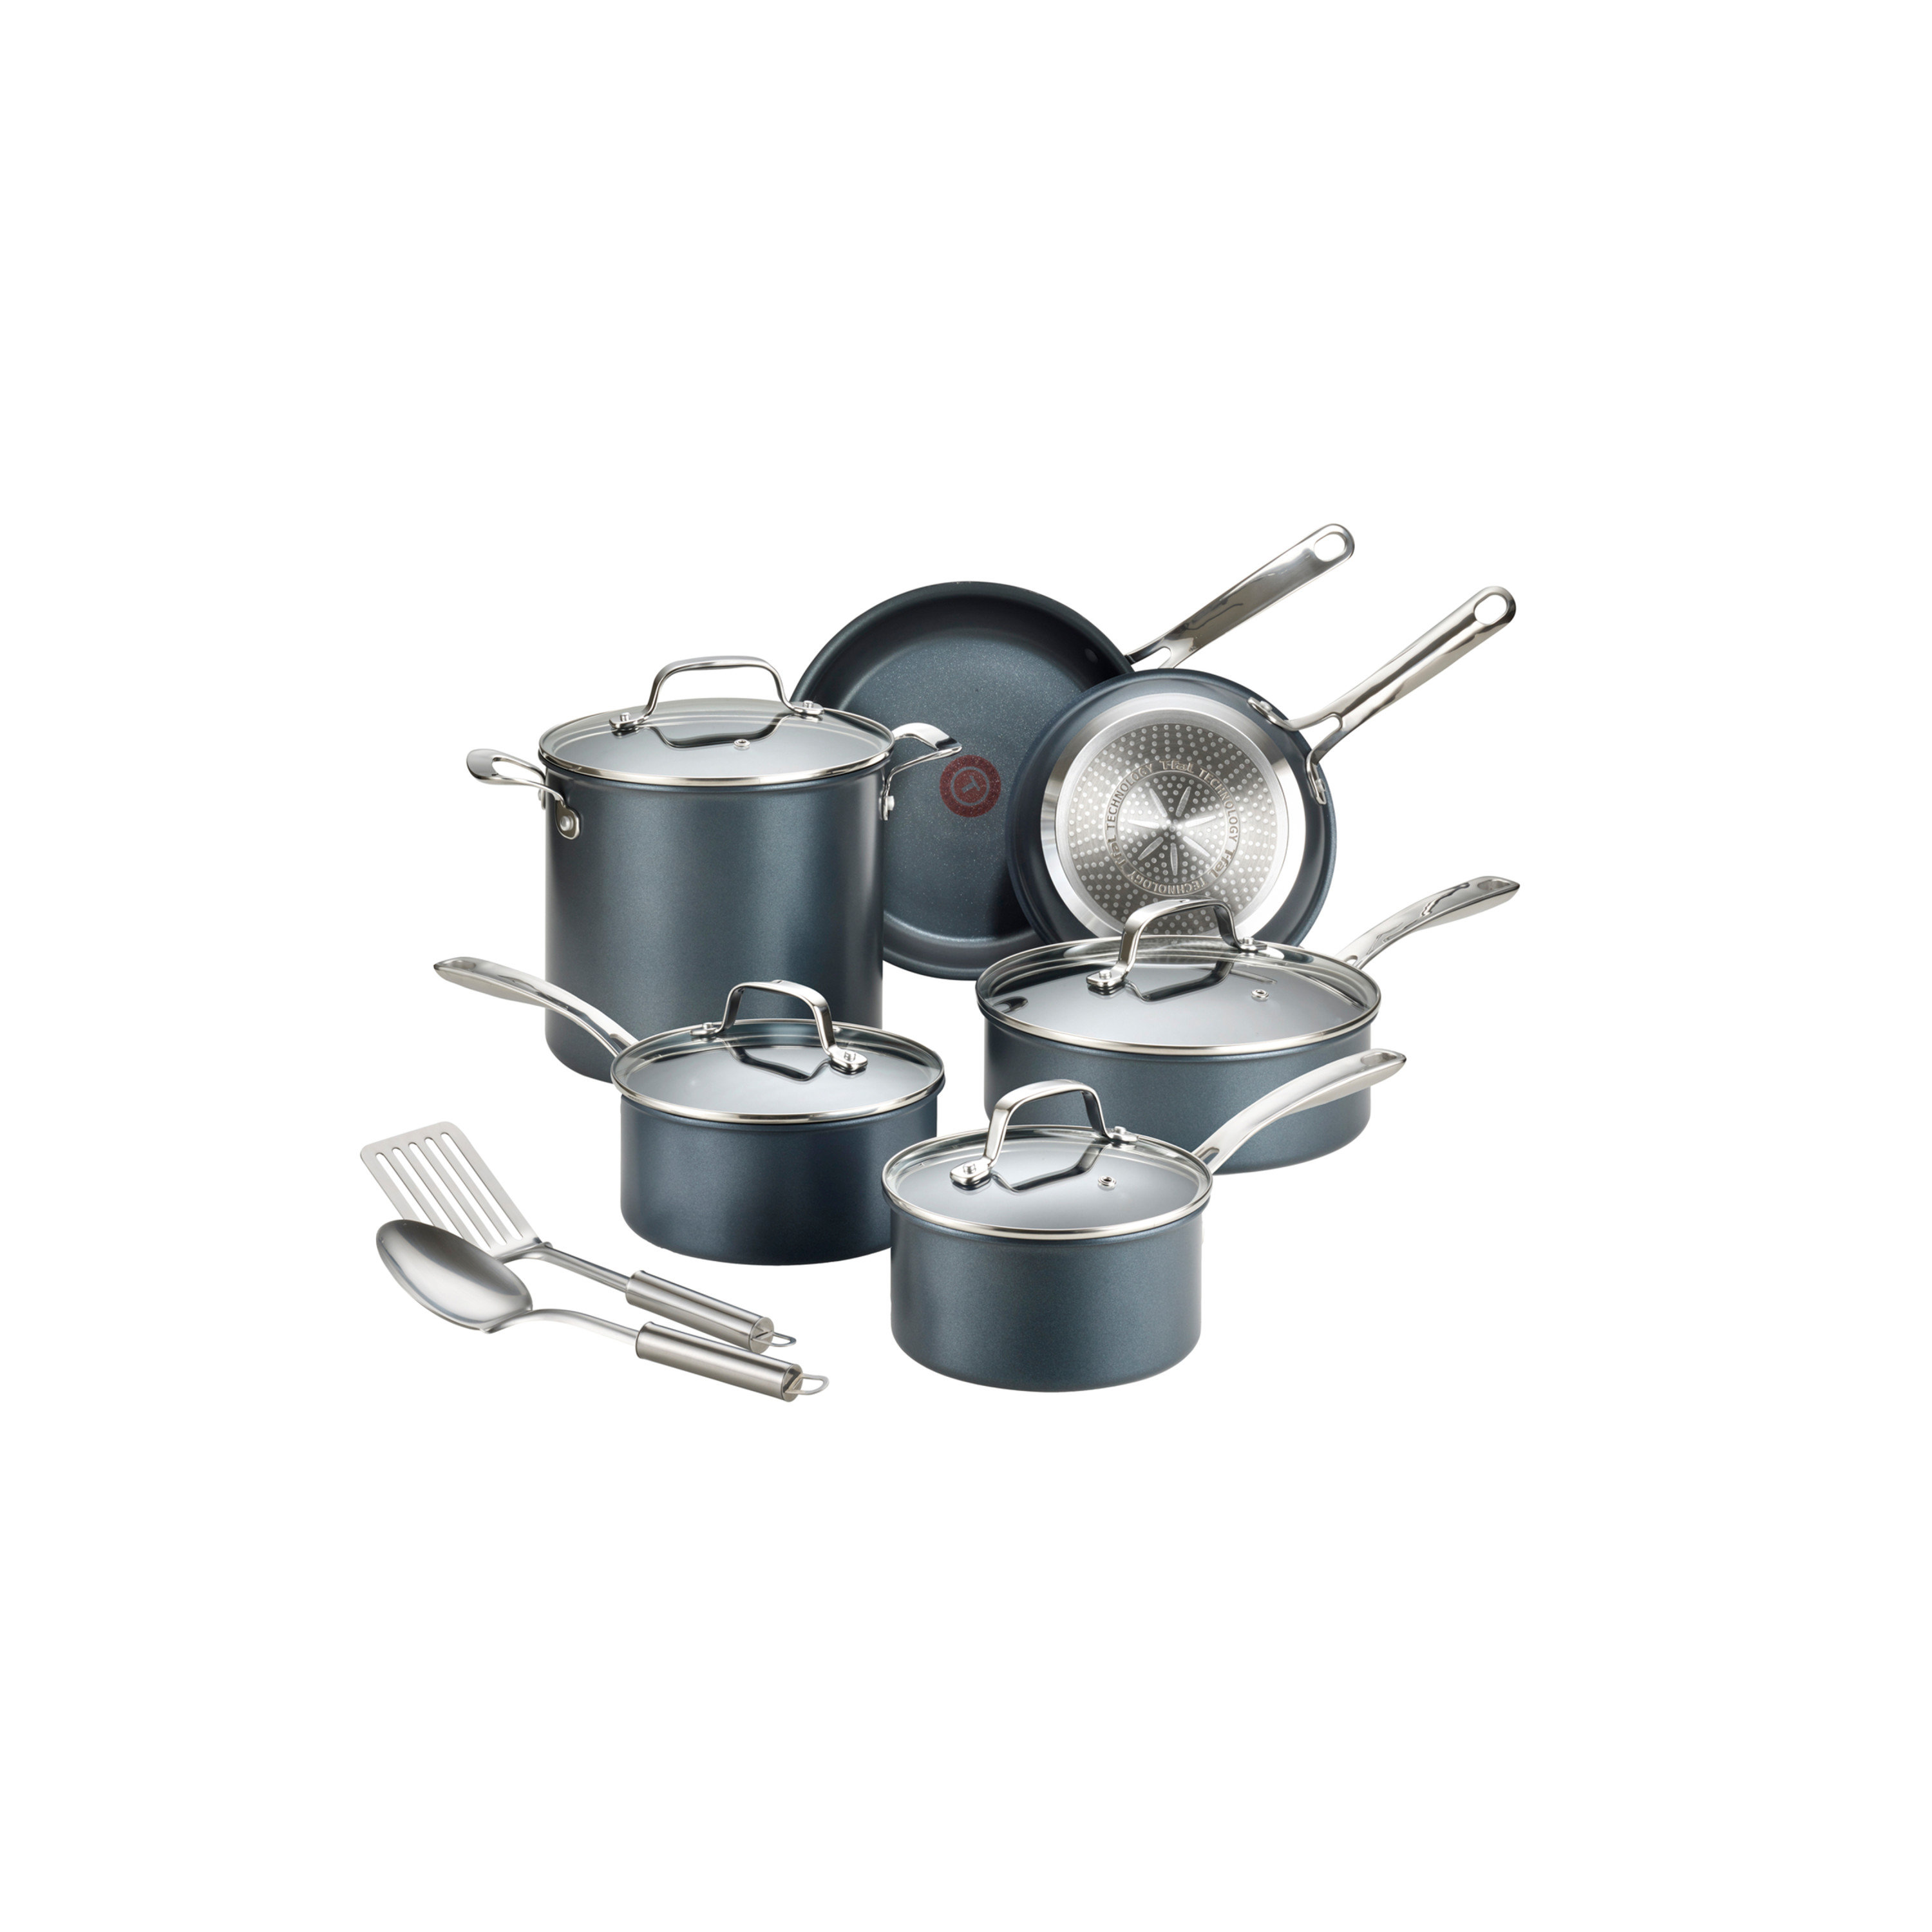 T-fal Stainless Steel Cookware Set 11 Piece Induction, Pots and Pans,  Dishwasher Safe